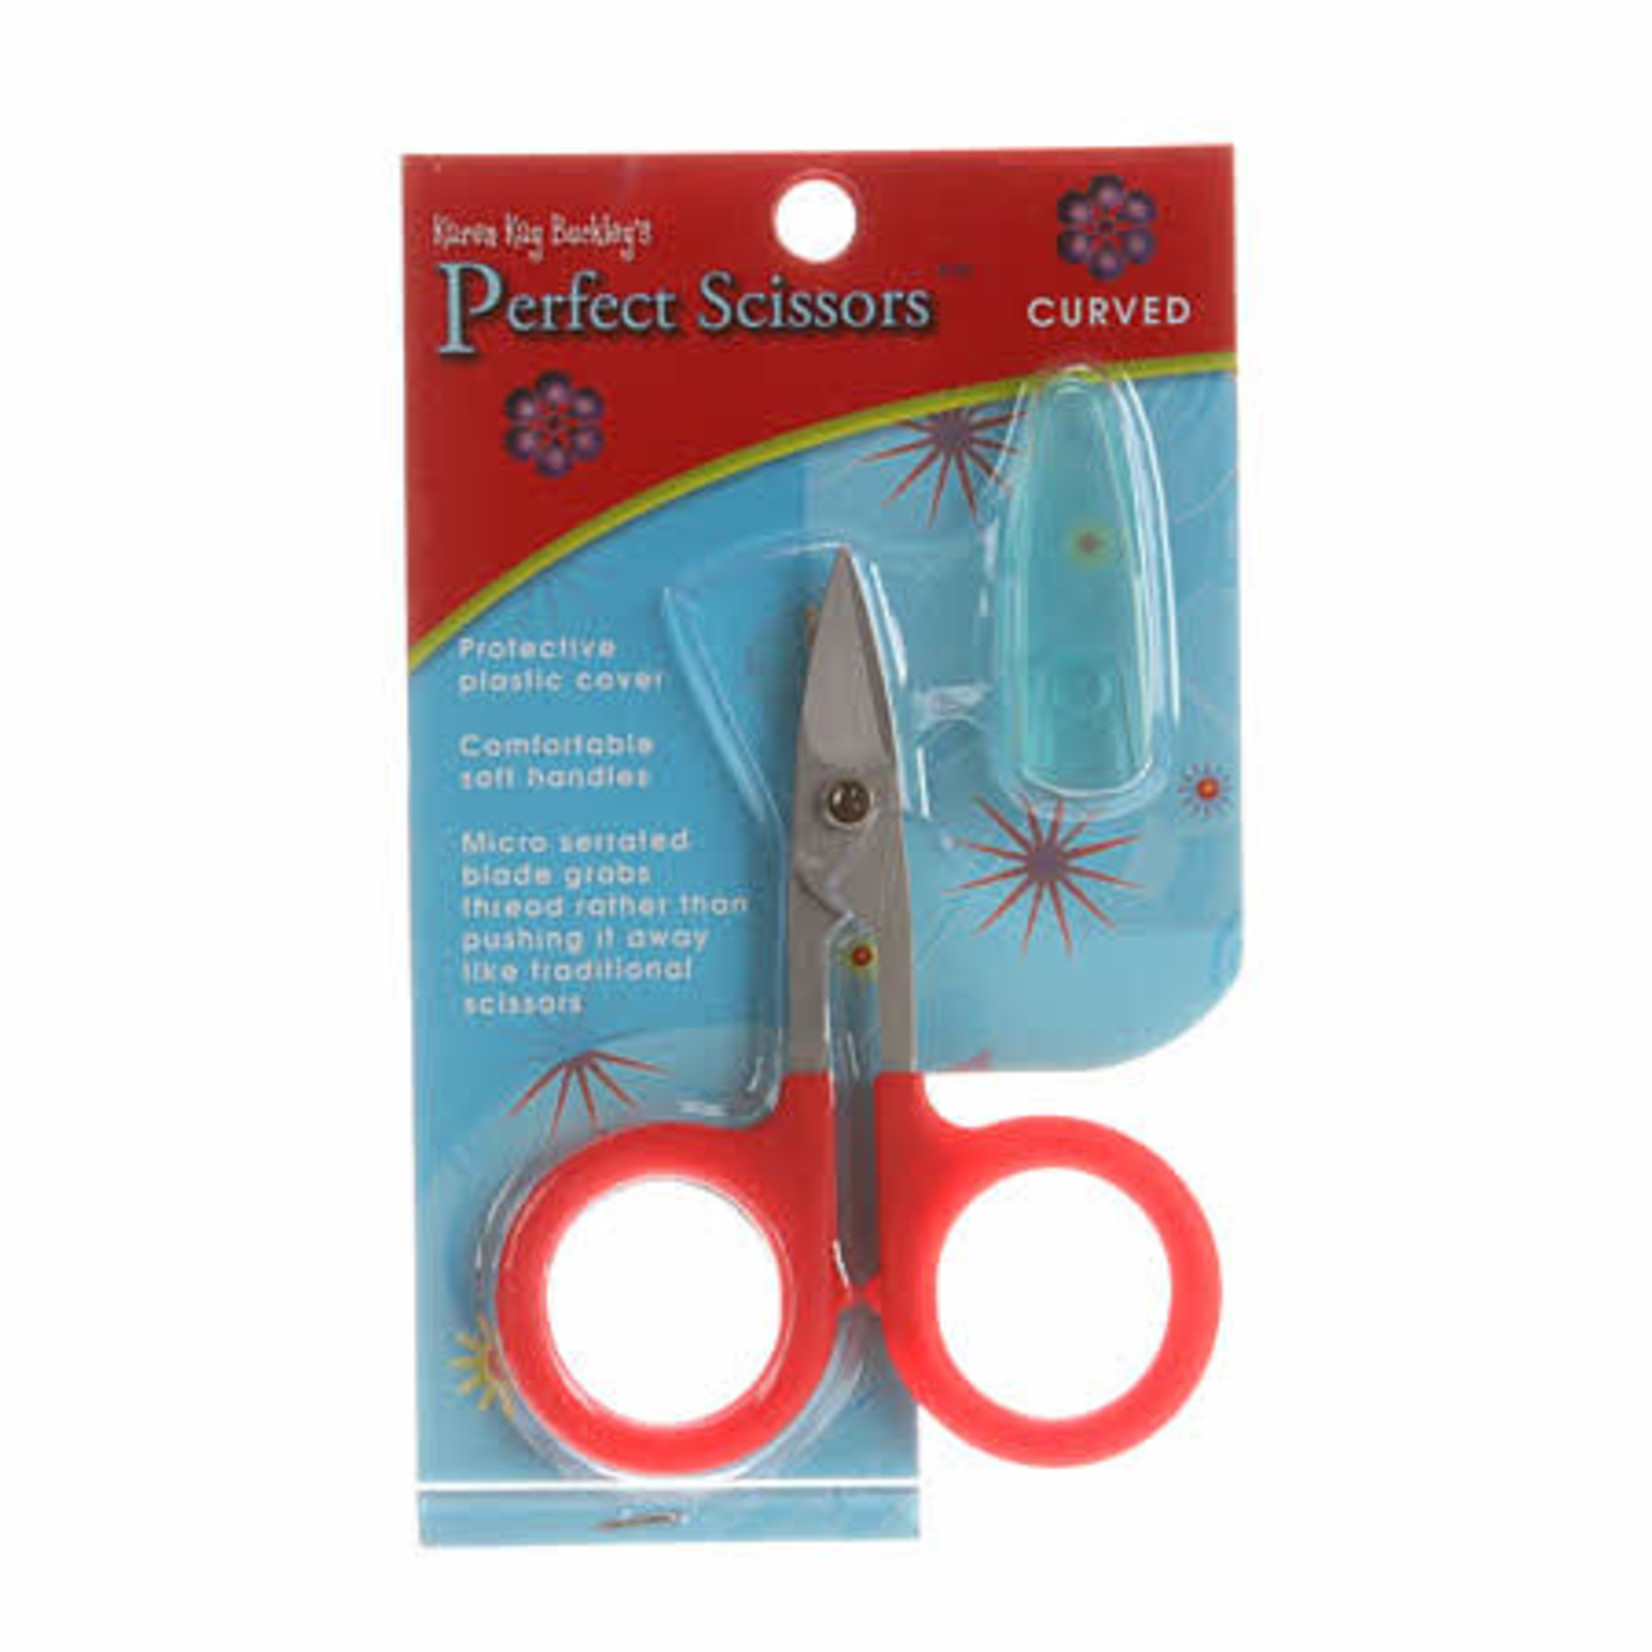 Karen Kay Buckley Perfect Scissors (Microserrated) Curved Small